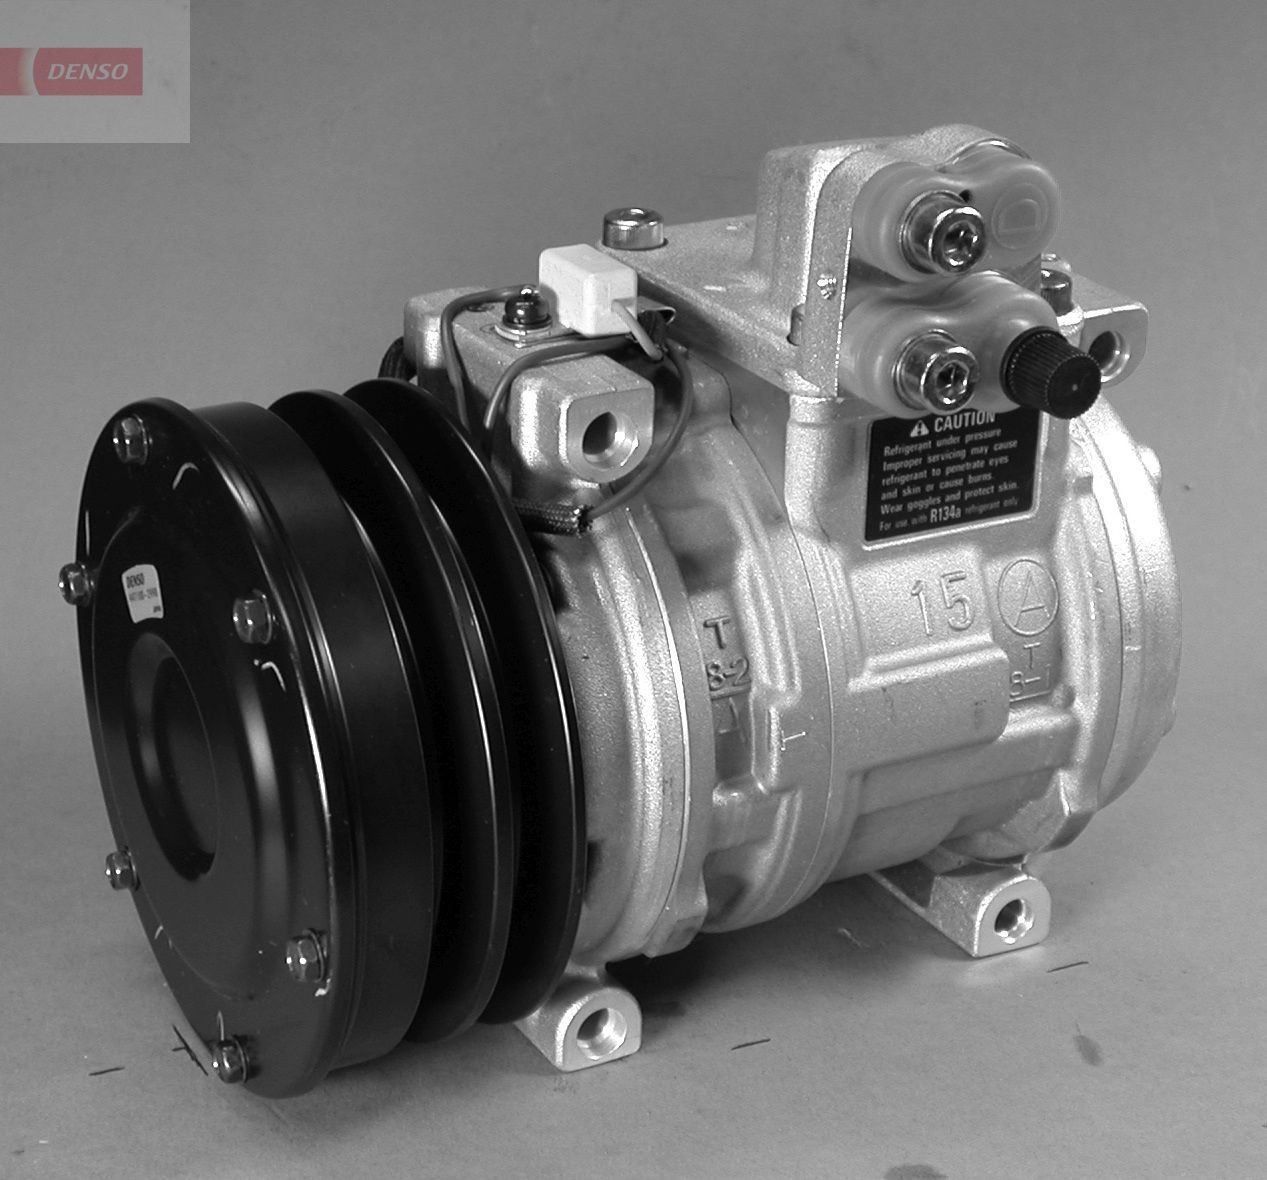 DENSO DCP99504 Air conditioning compressor 10PA15C, 12V, PAG 46, R 134a, with magnetic clutch